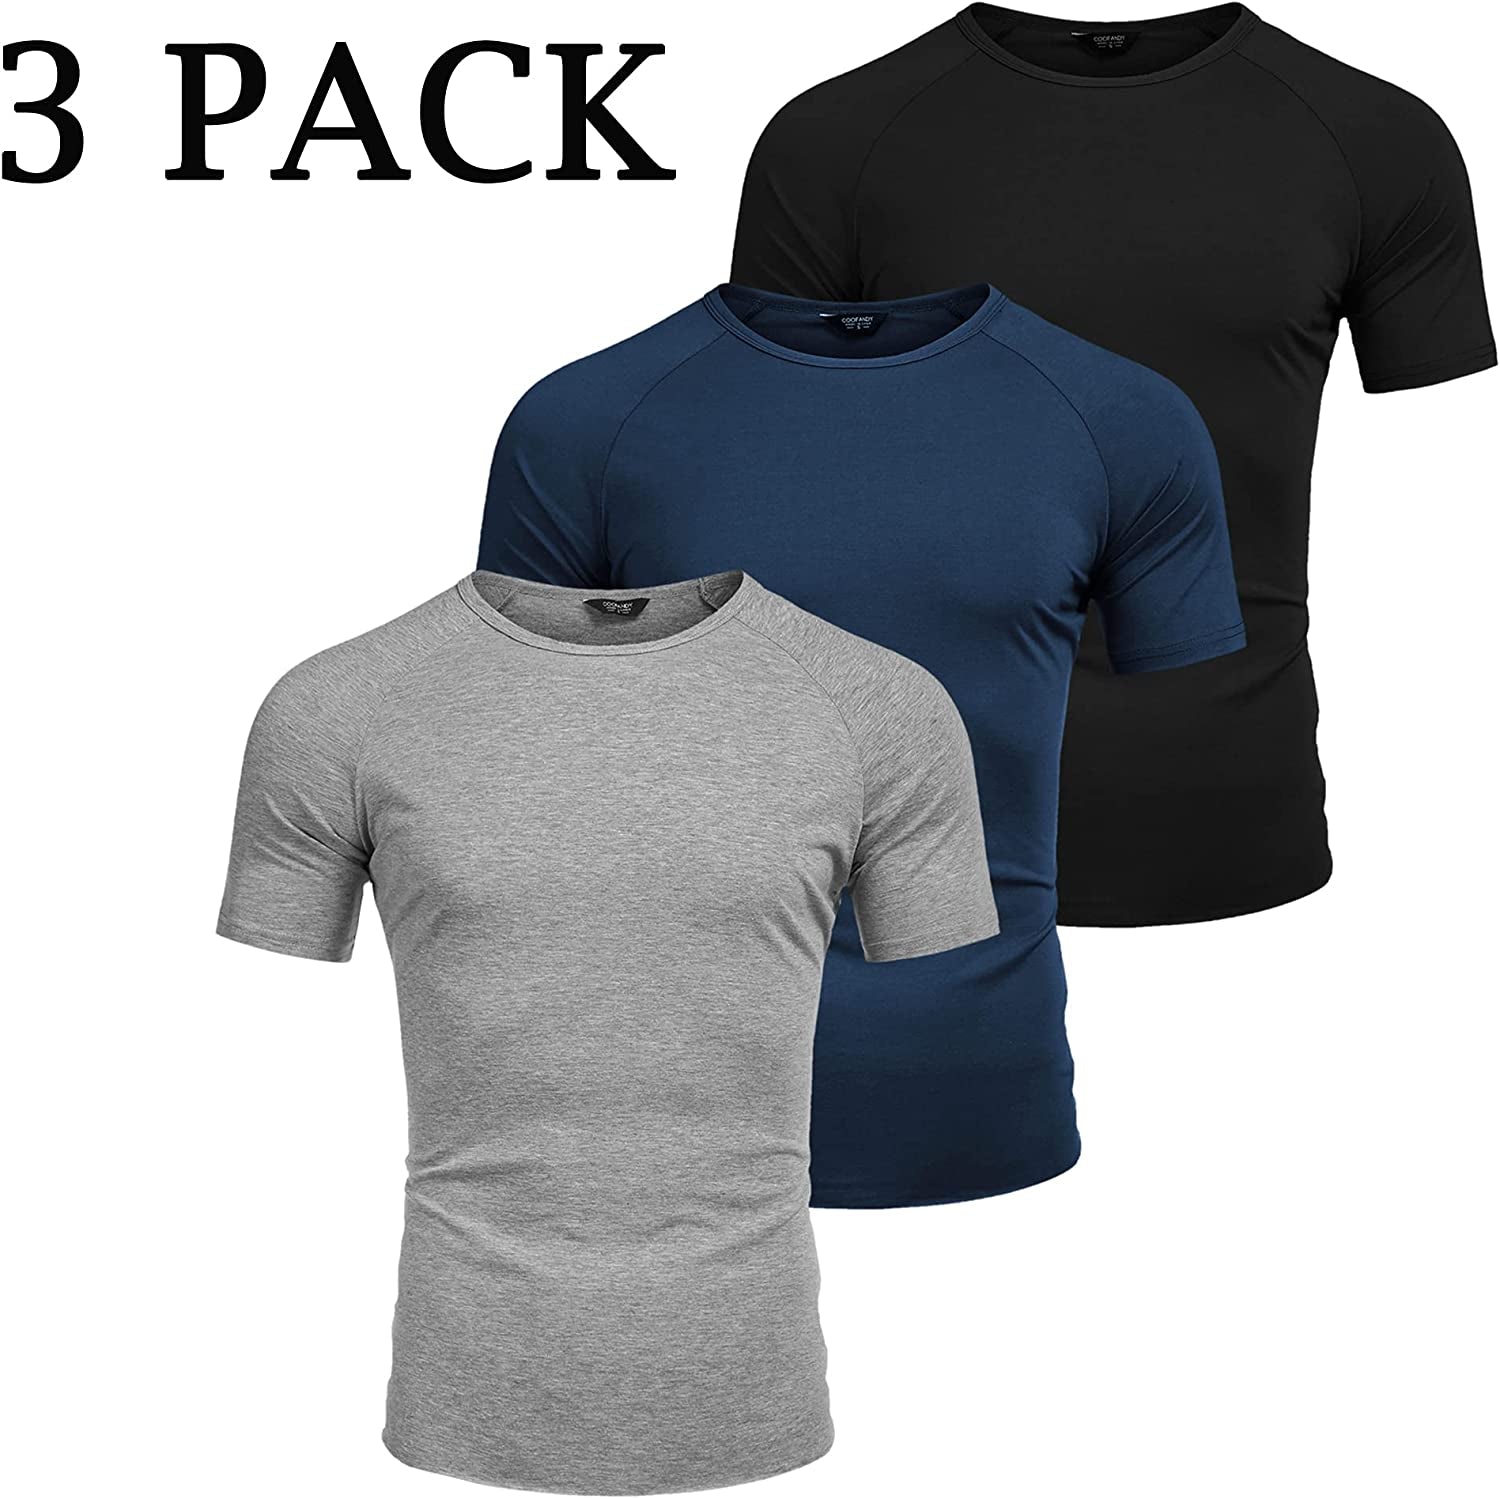 Men 3 Pack Workout T Shirts Short Sleeve Gym Bodybuilding Muscle Shirts Base Layer Fitness Tee Tops